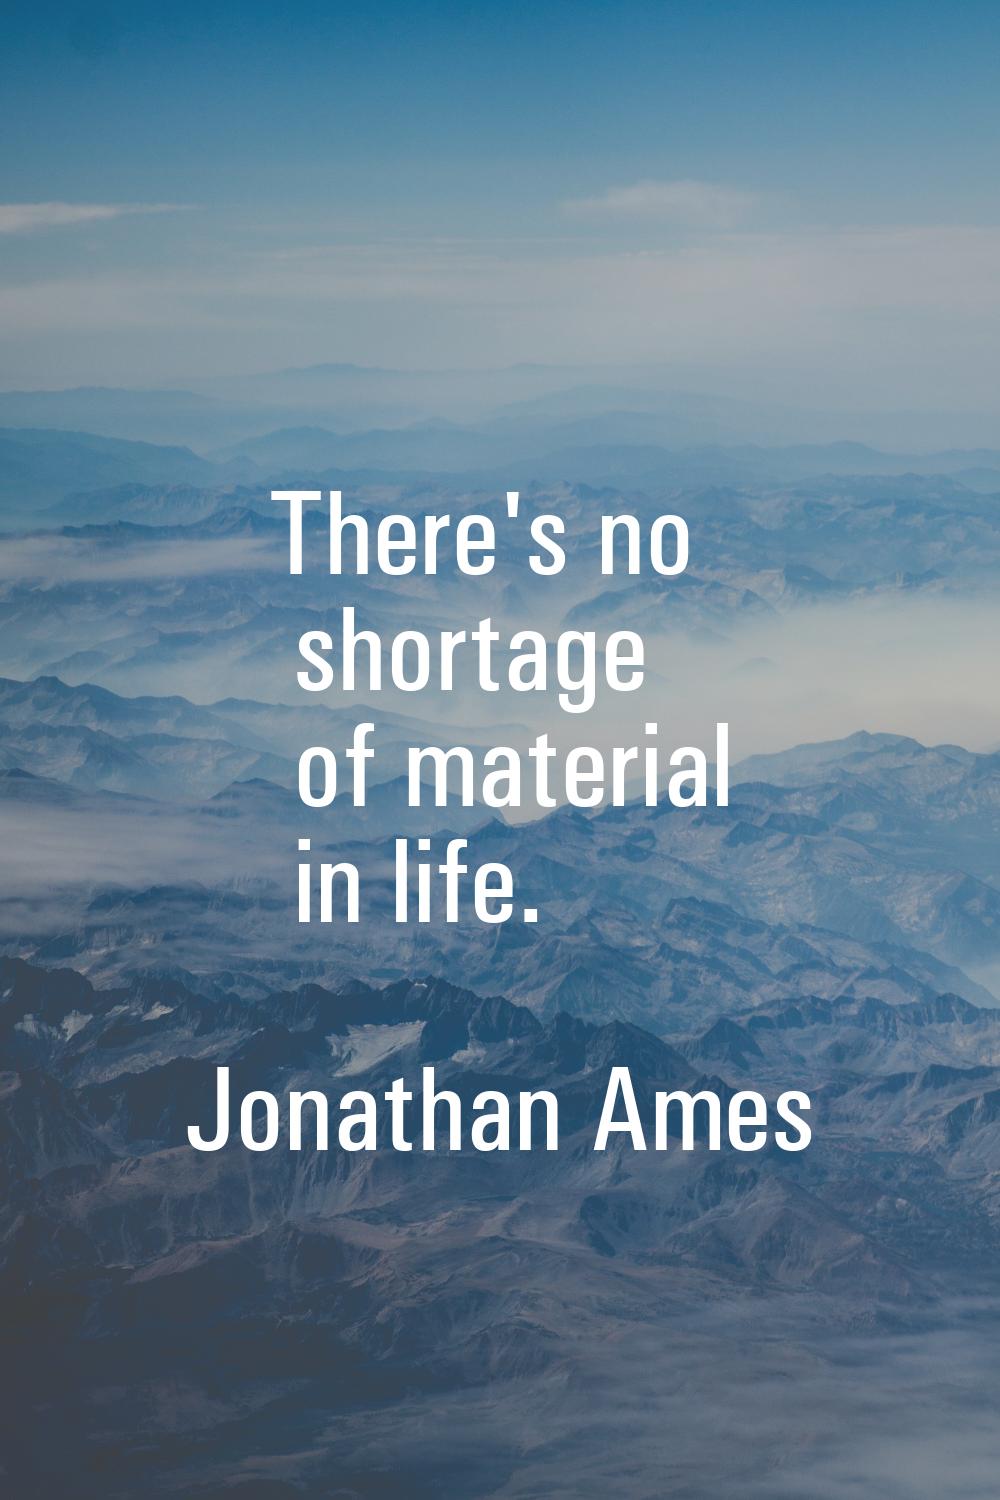 There's no shortage of material in life.